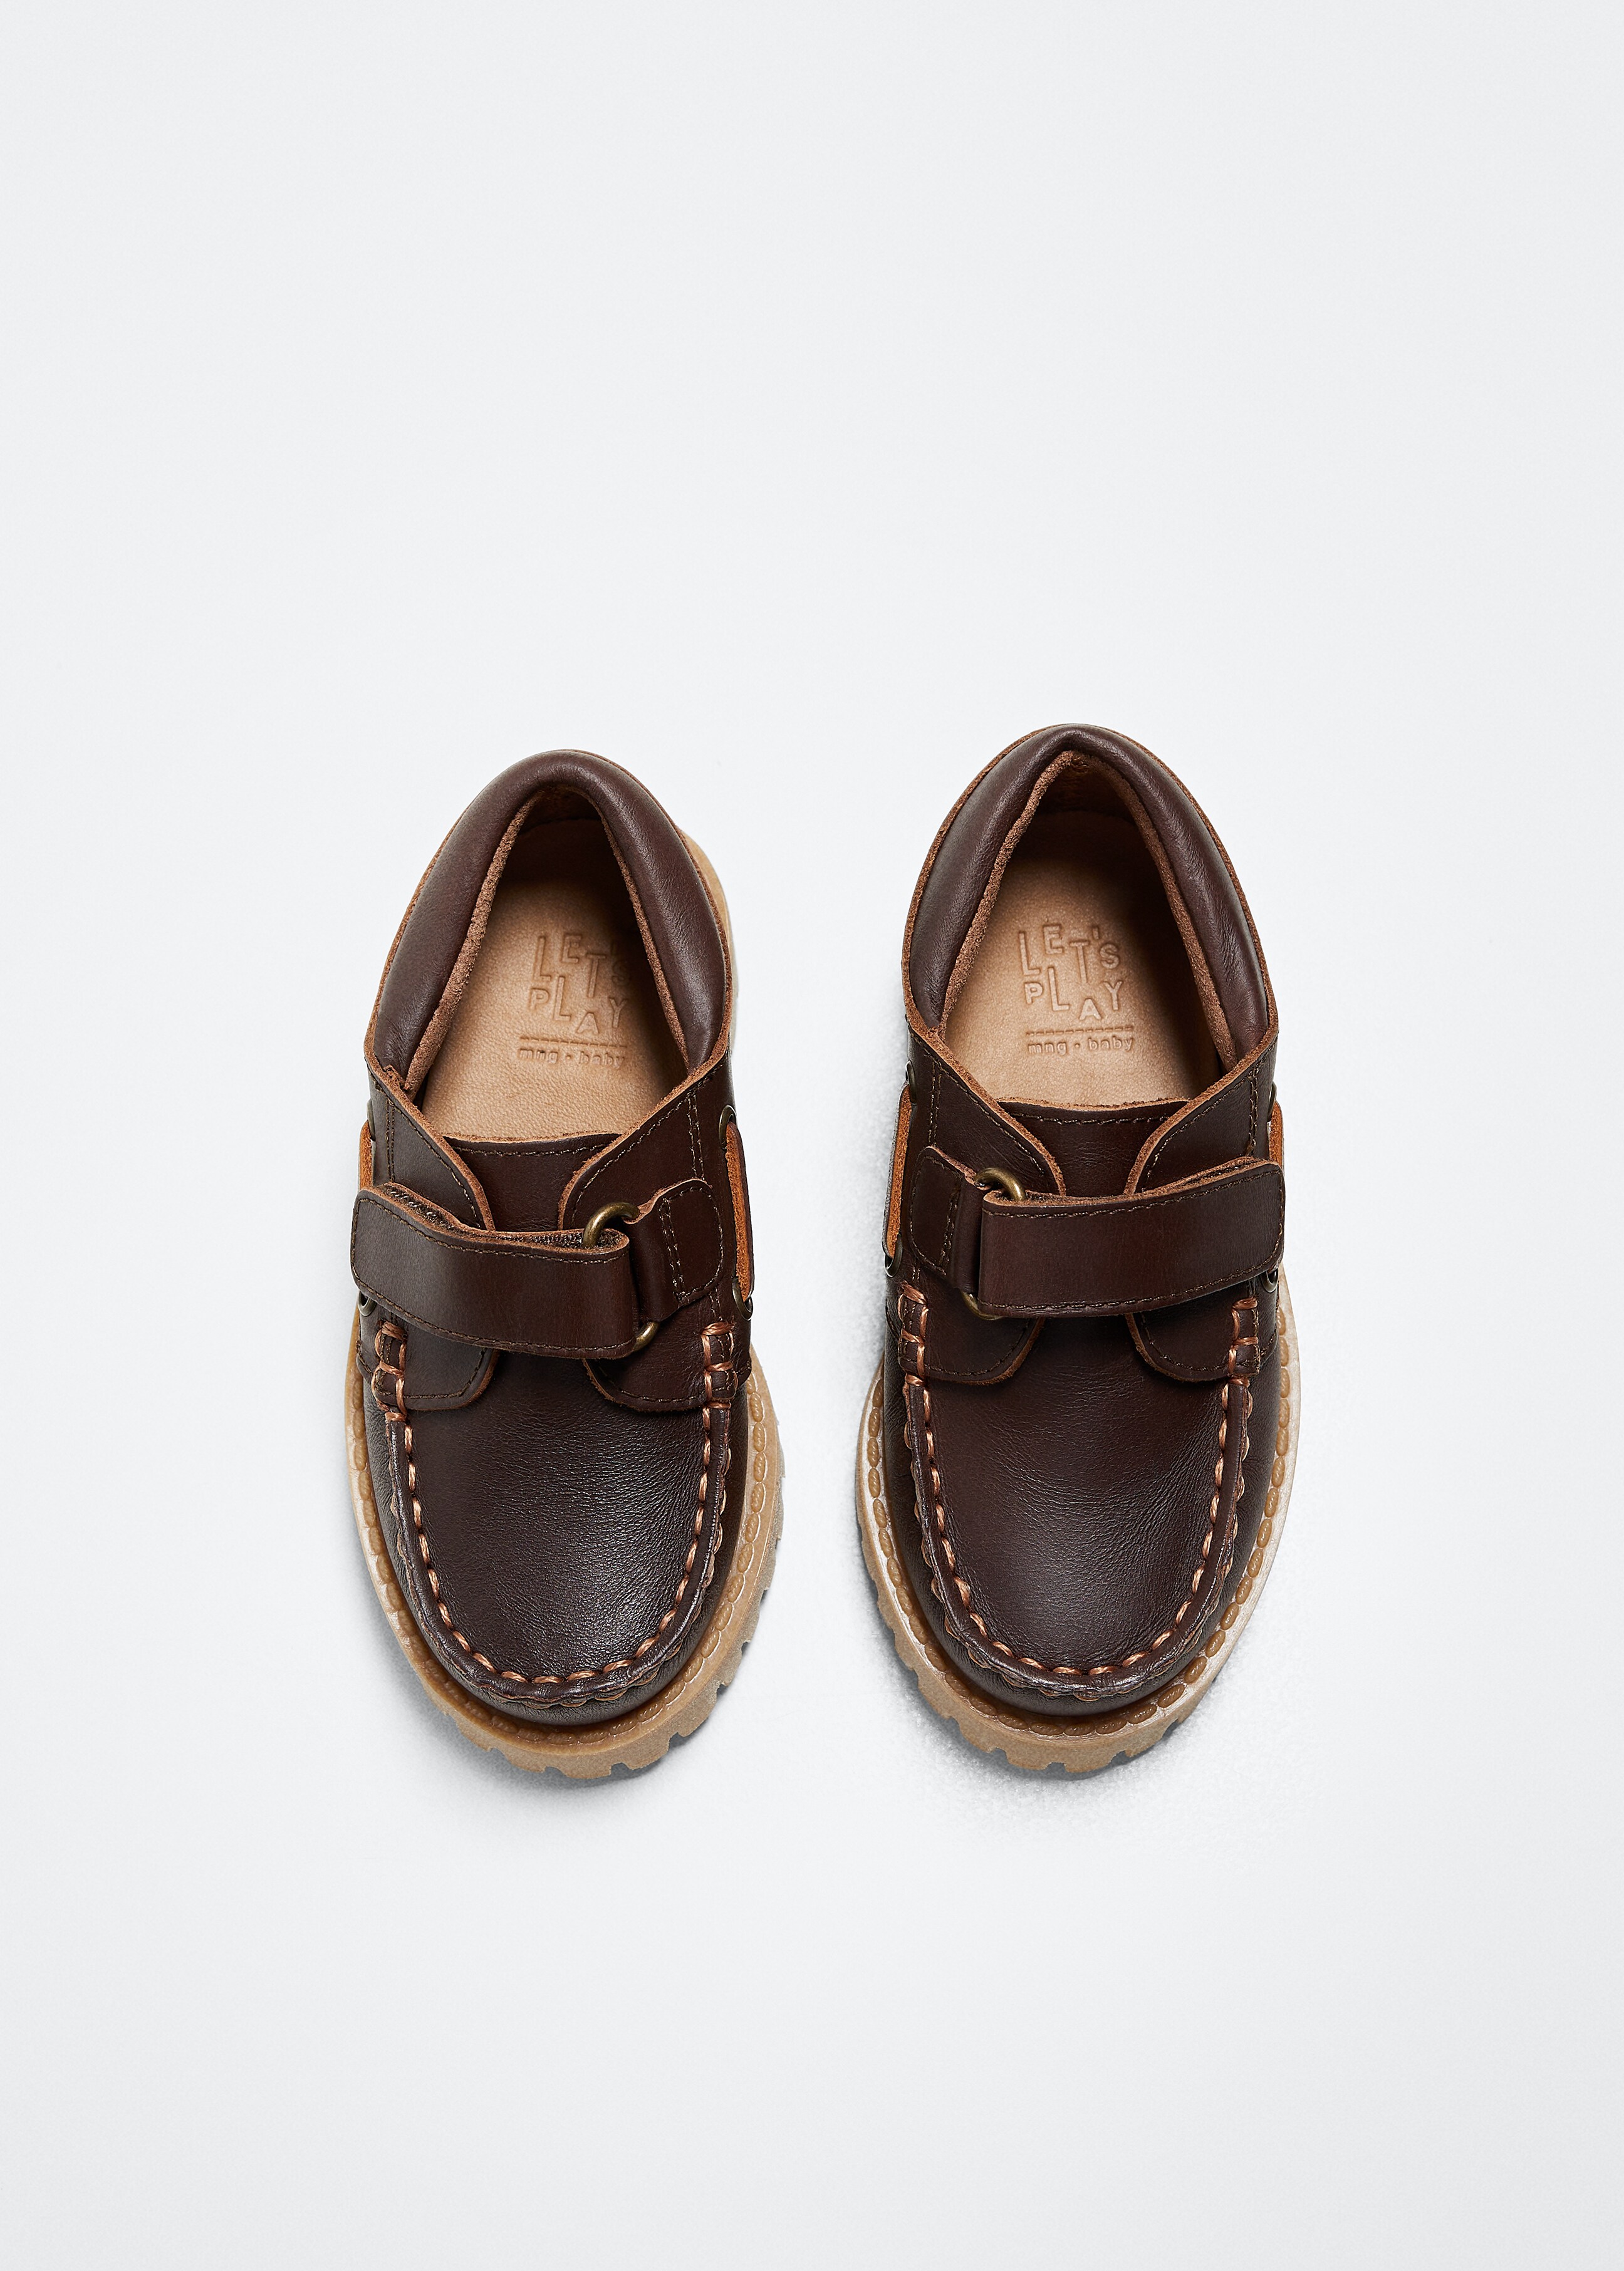 Leather boat shoes - Details of the article 3